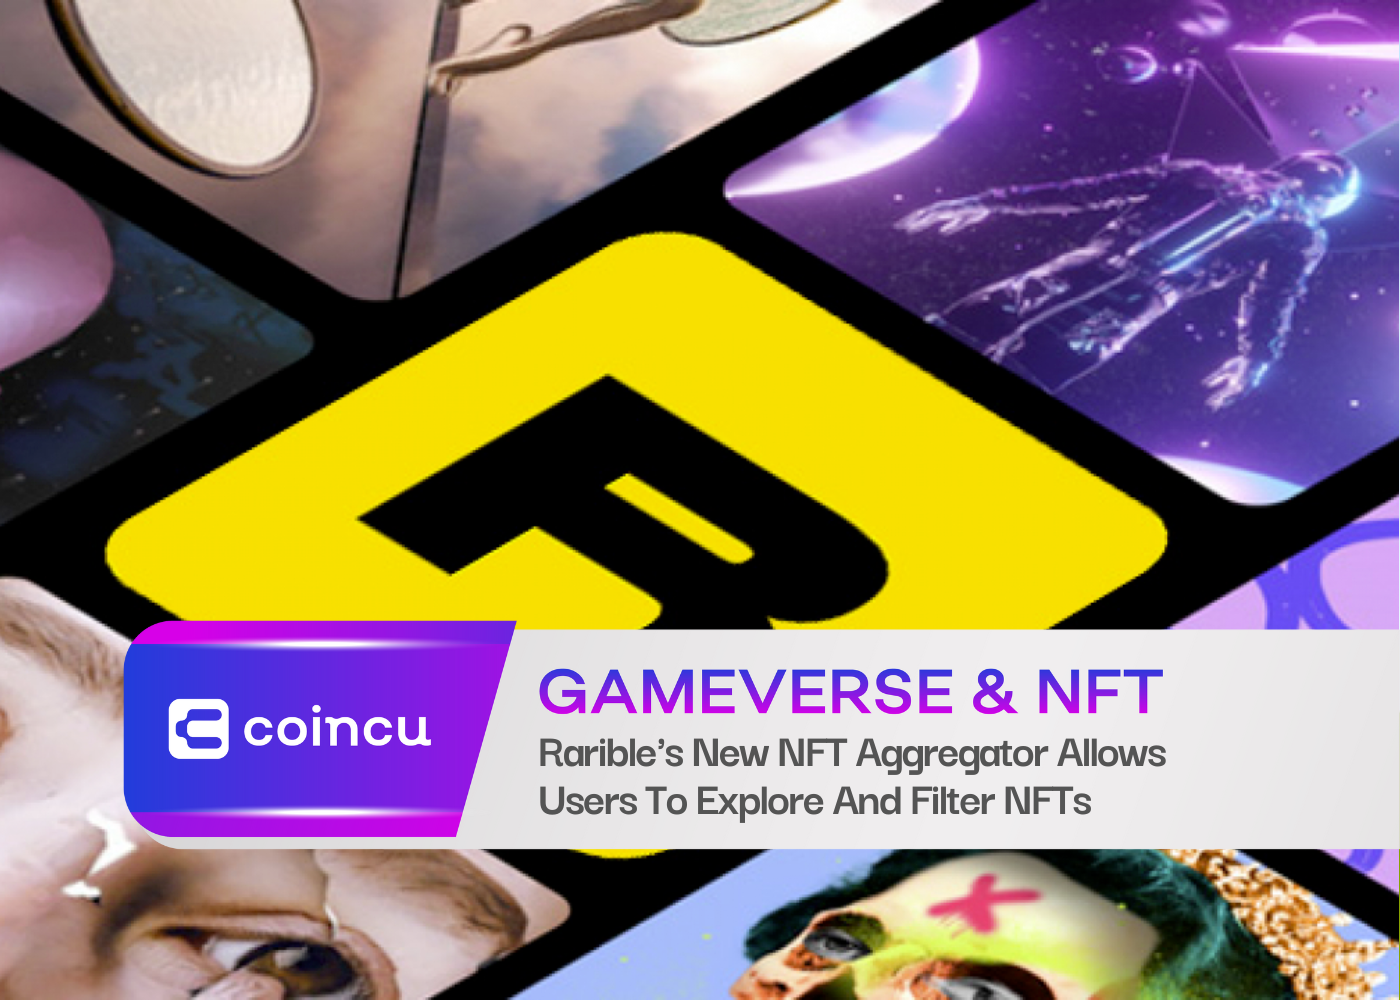 Rarible's New NFT Aggregator Allows Users To Explore And Filter NFTs